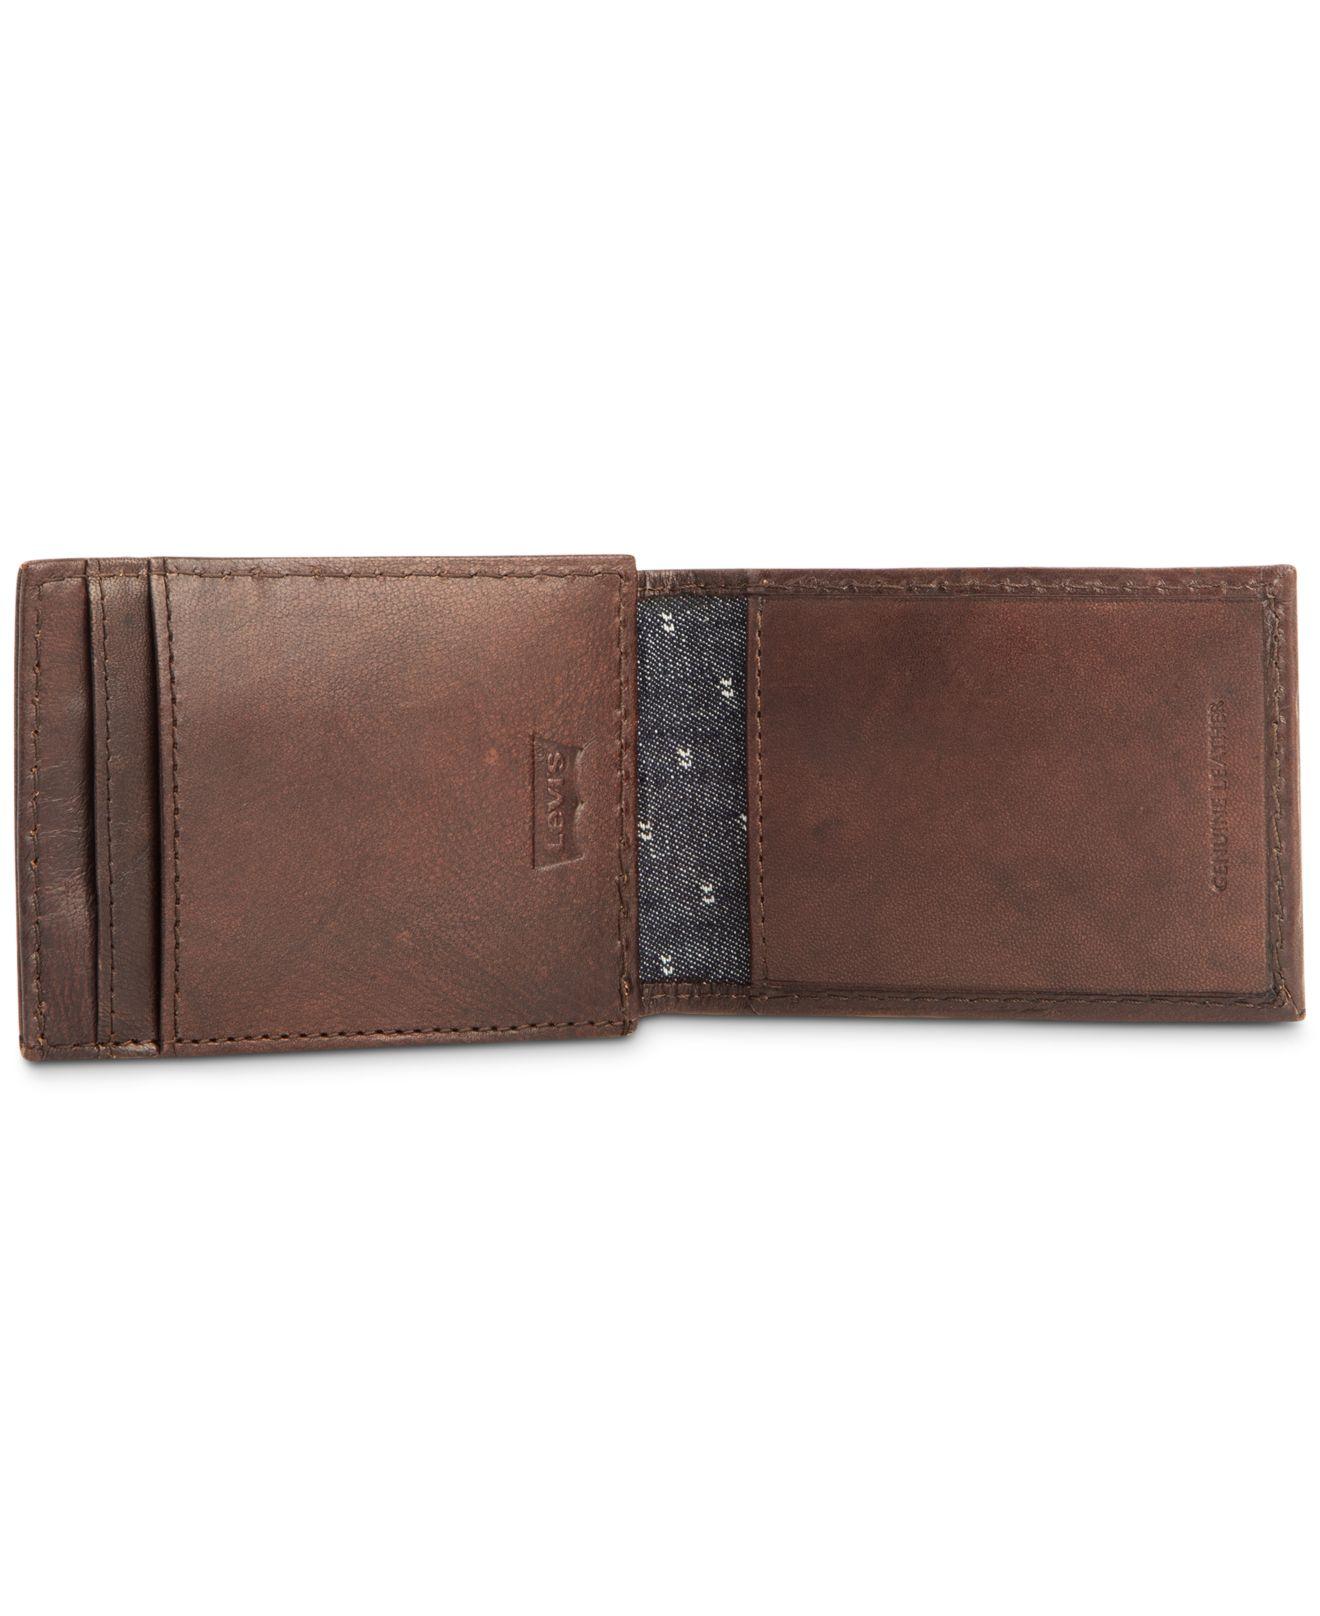 levi's leather wallet in brown